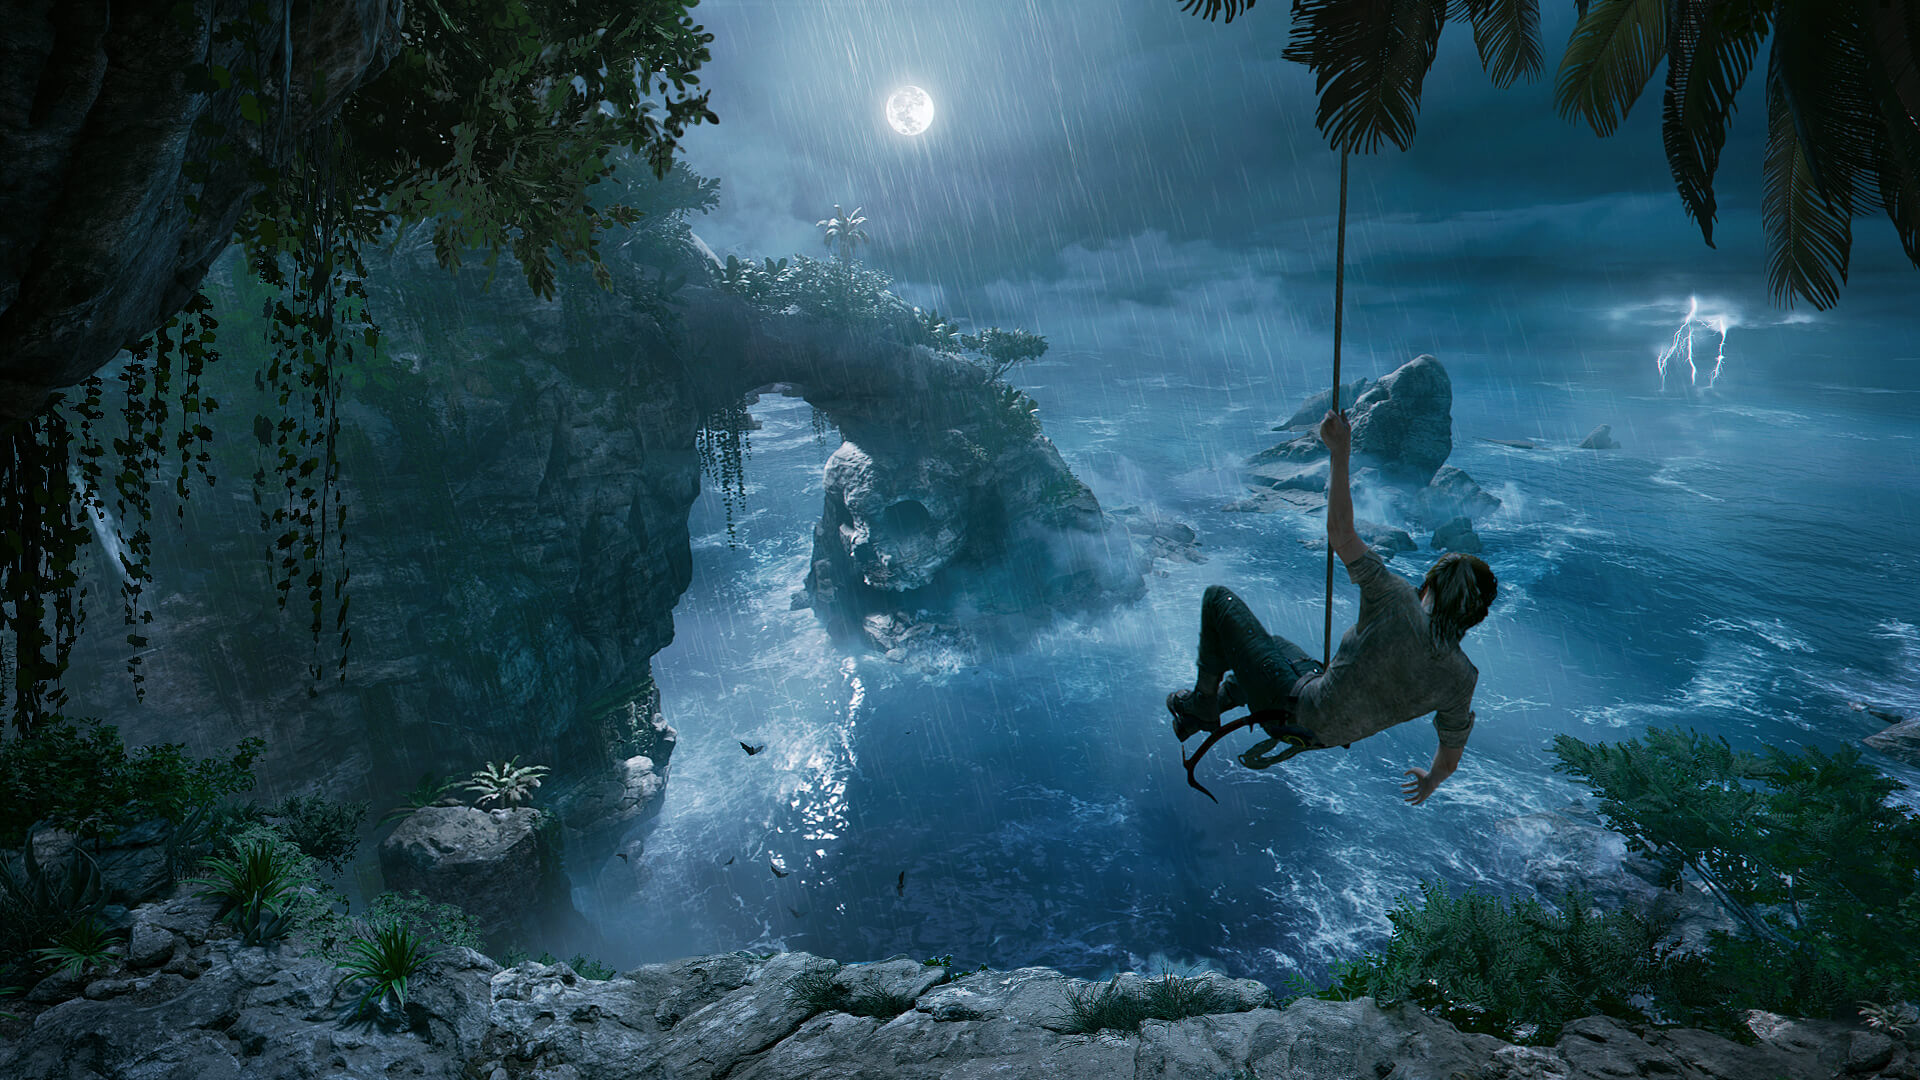 Lara hanging from a rope in Shadow of the Tomb Raider, which is one of the IPs that may have been sold to make way for a Sony Square Enix acquisition